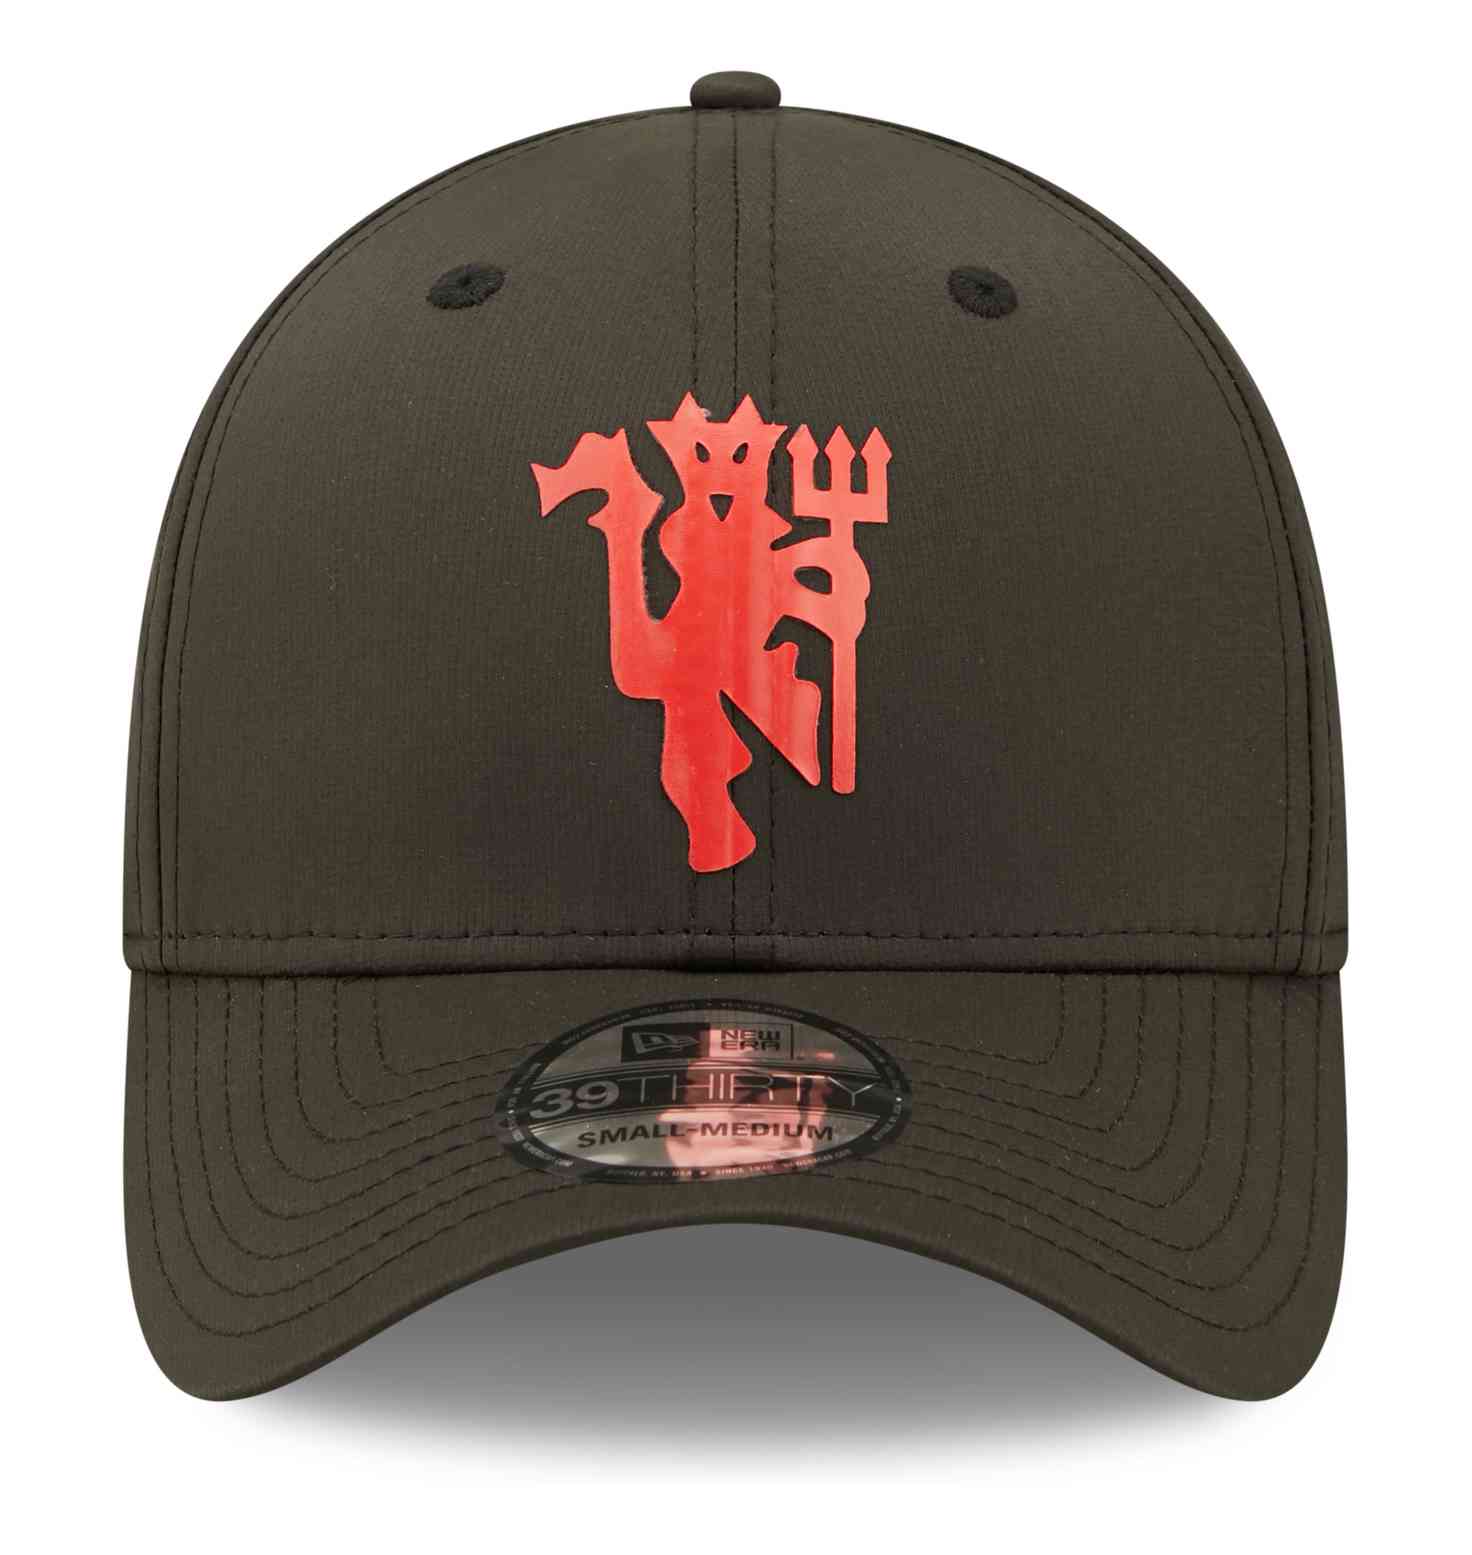 New Era - EPL Manchester United Quill Tech 39Thirty Stretch Cap